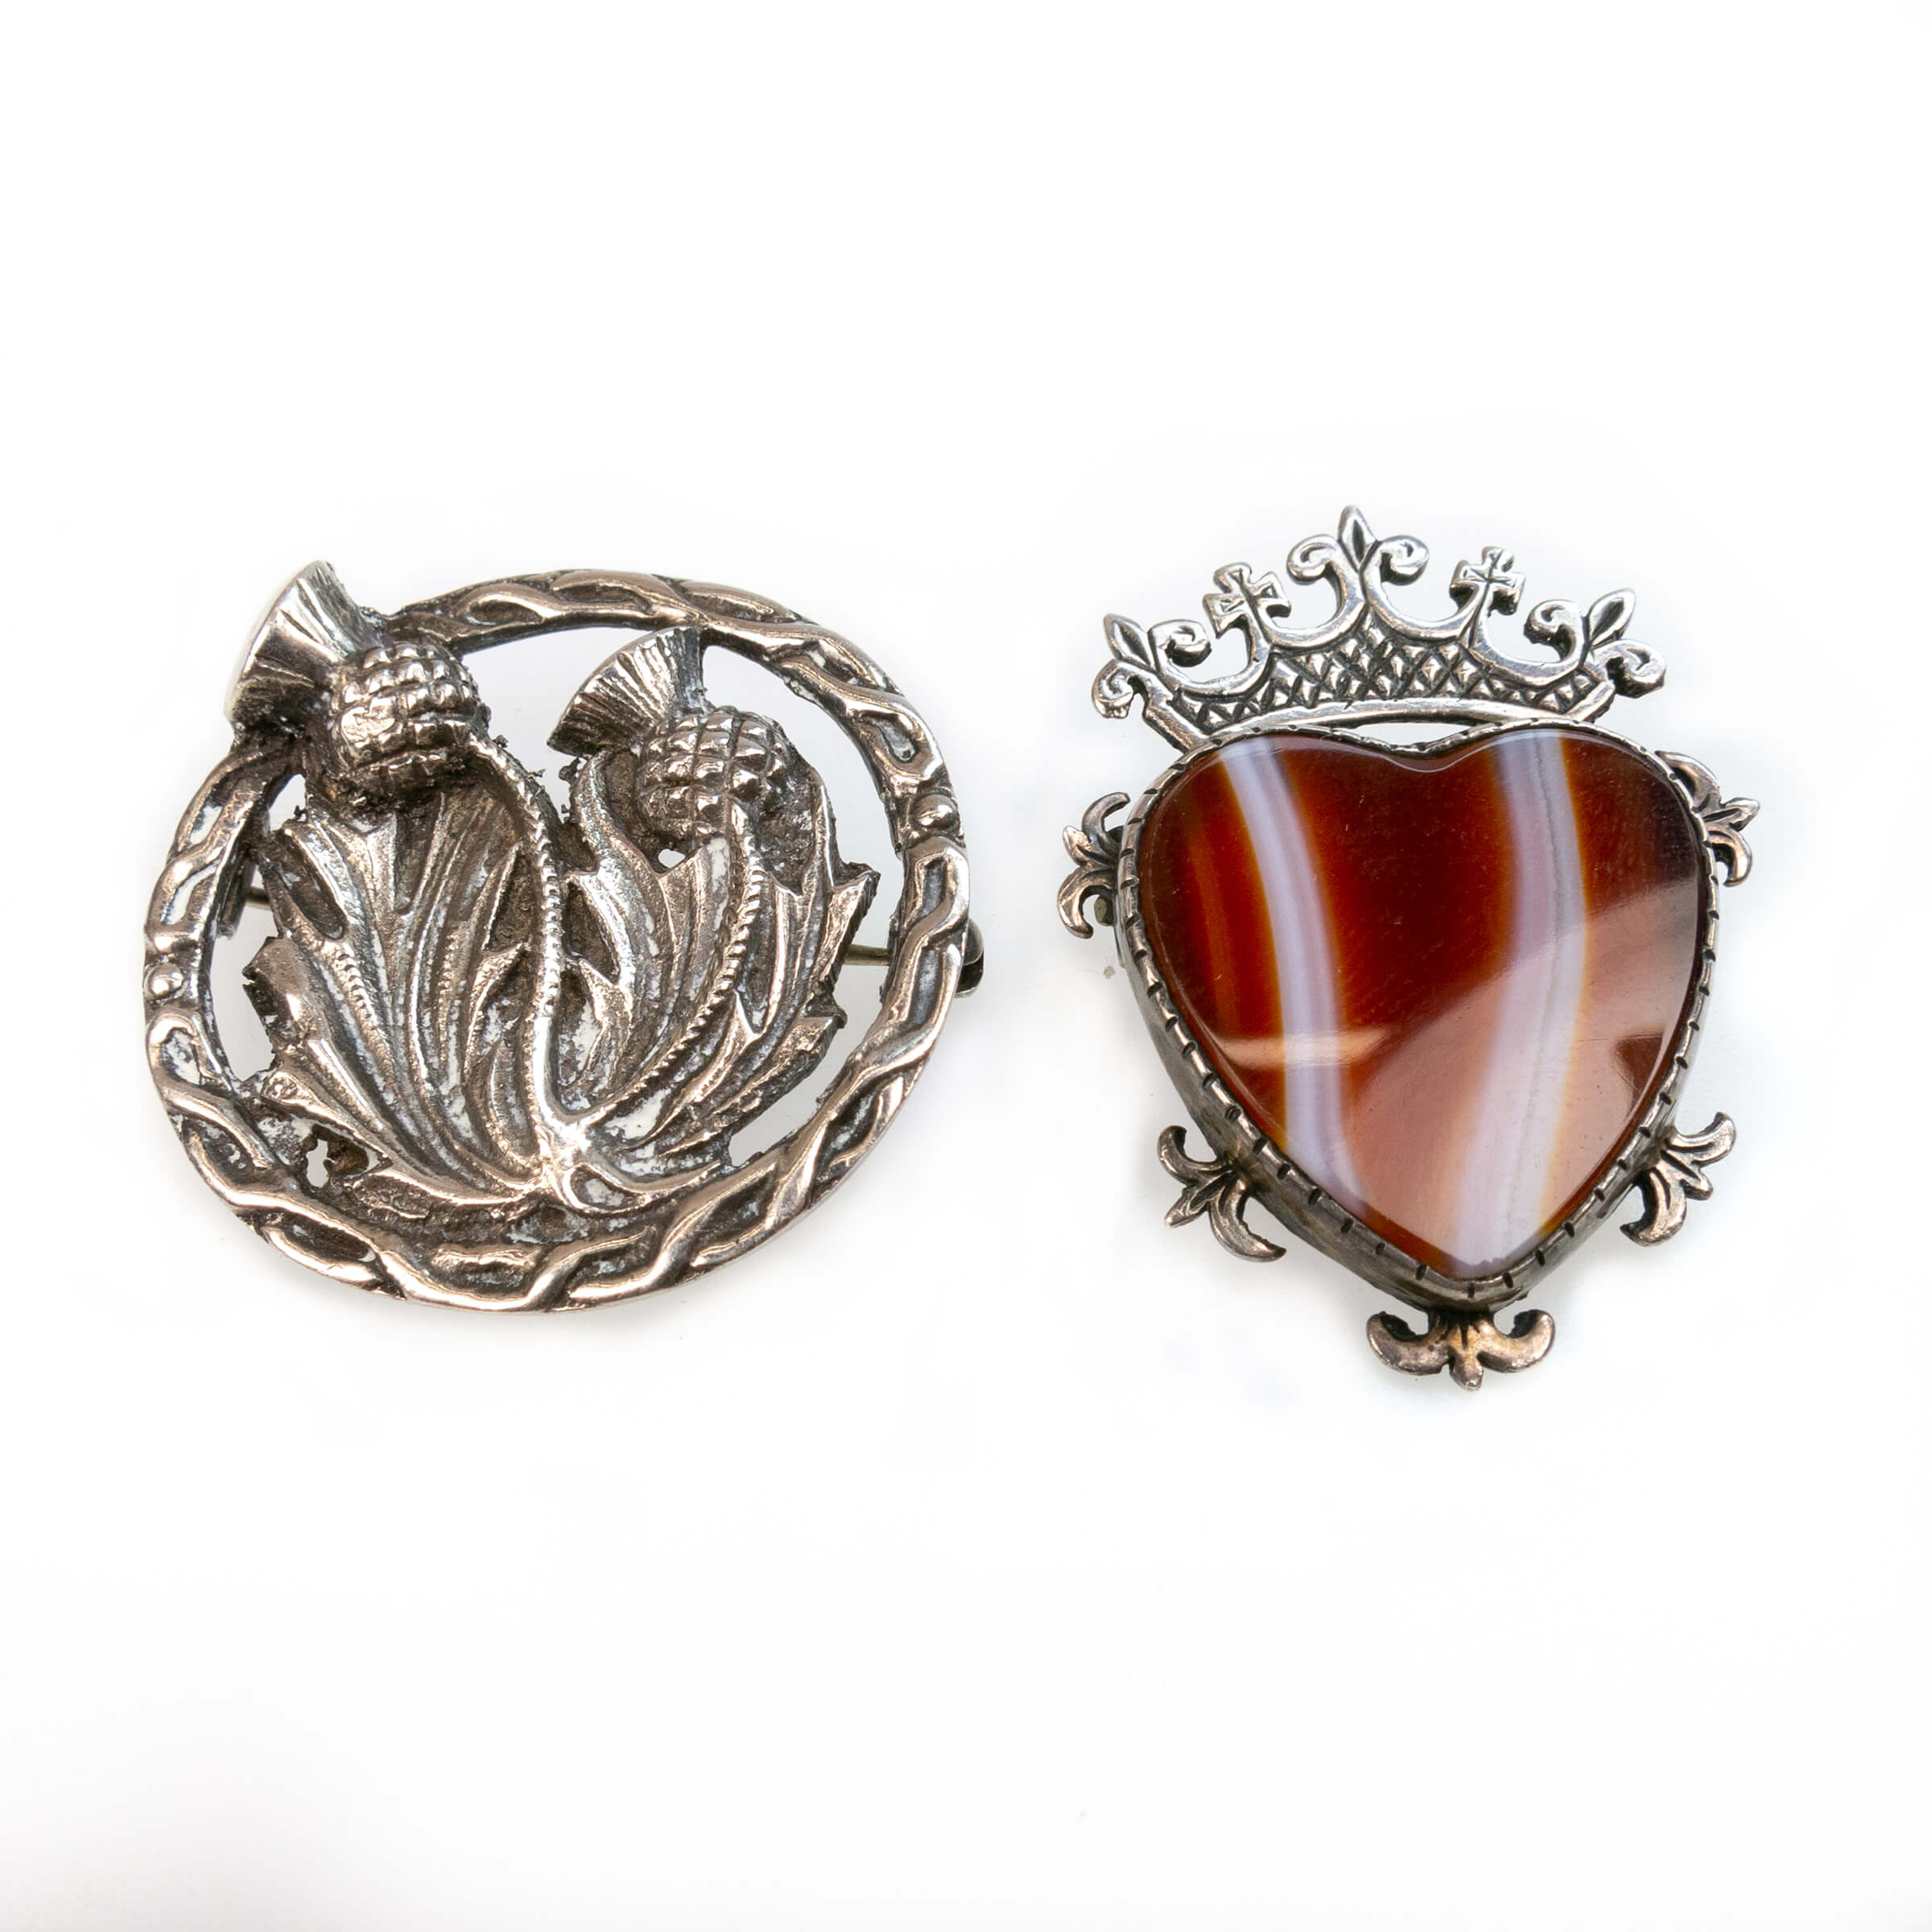 Two Scottish Silver Brooches